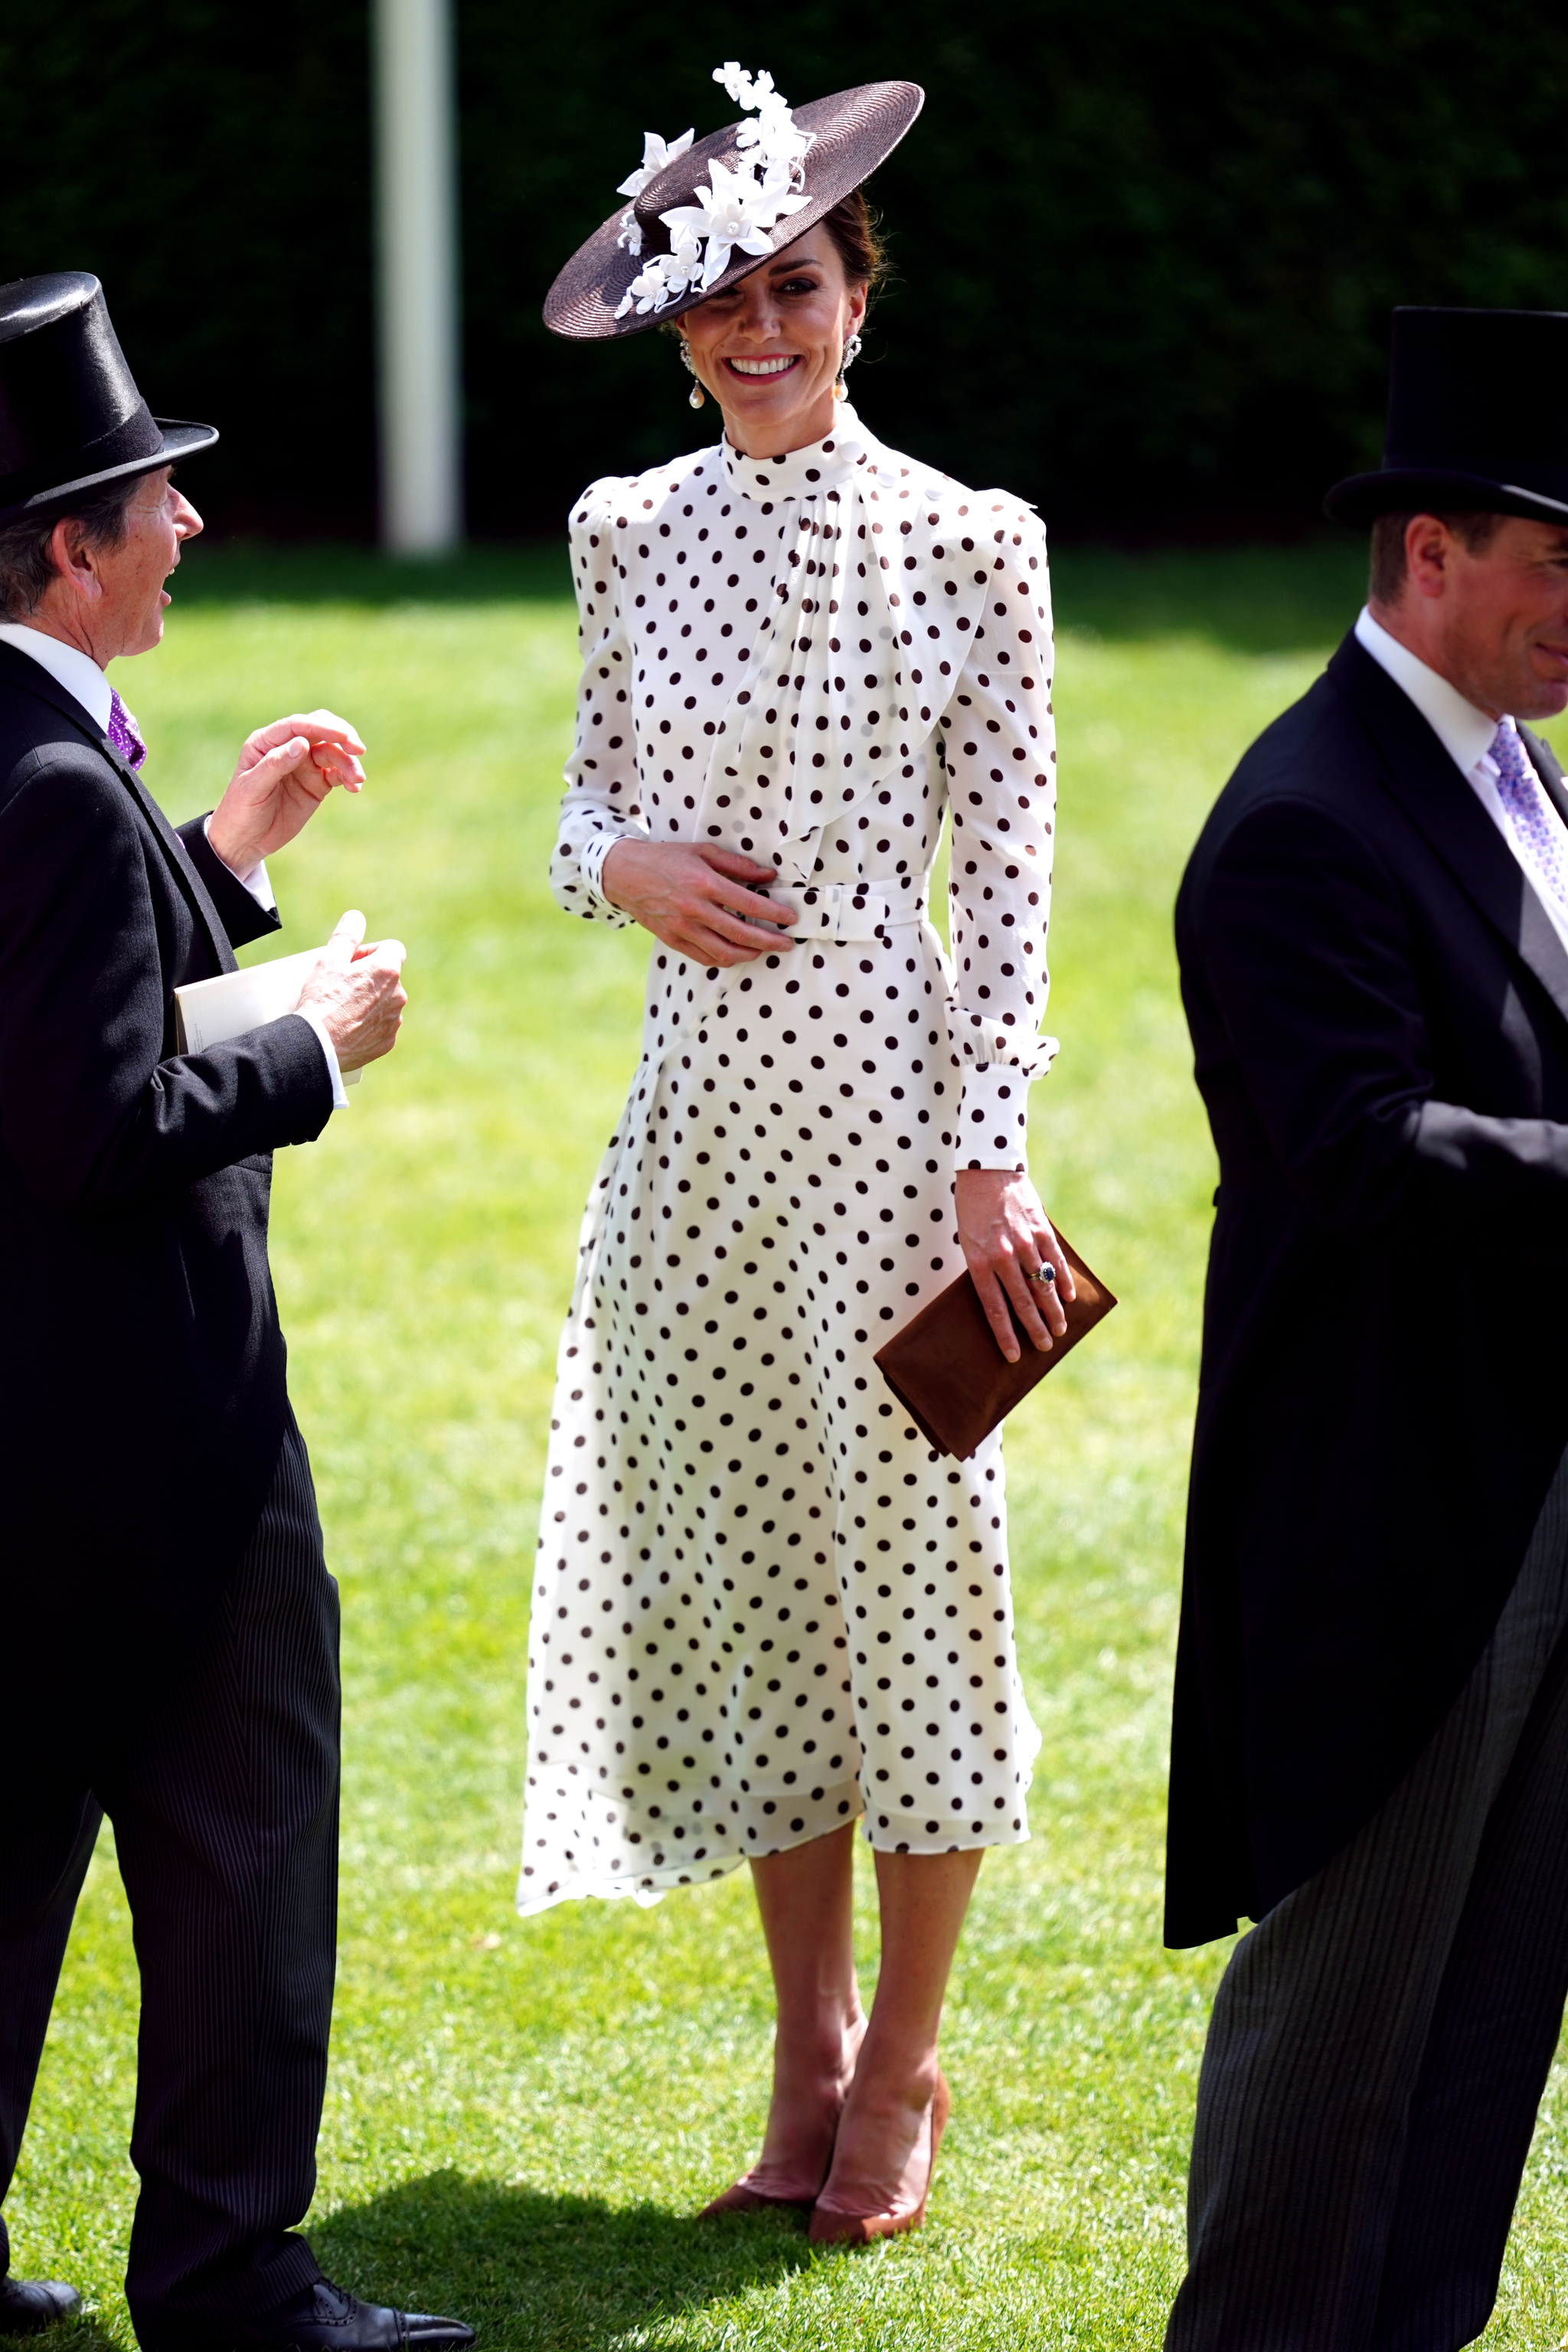 Kate Middleton in a polka dot dress by Alessandra Rich at Ascot.